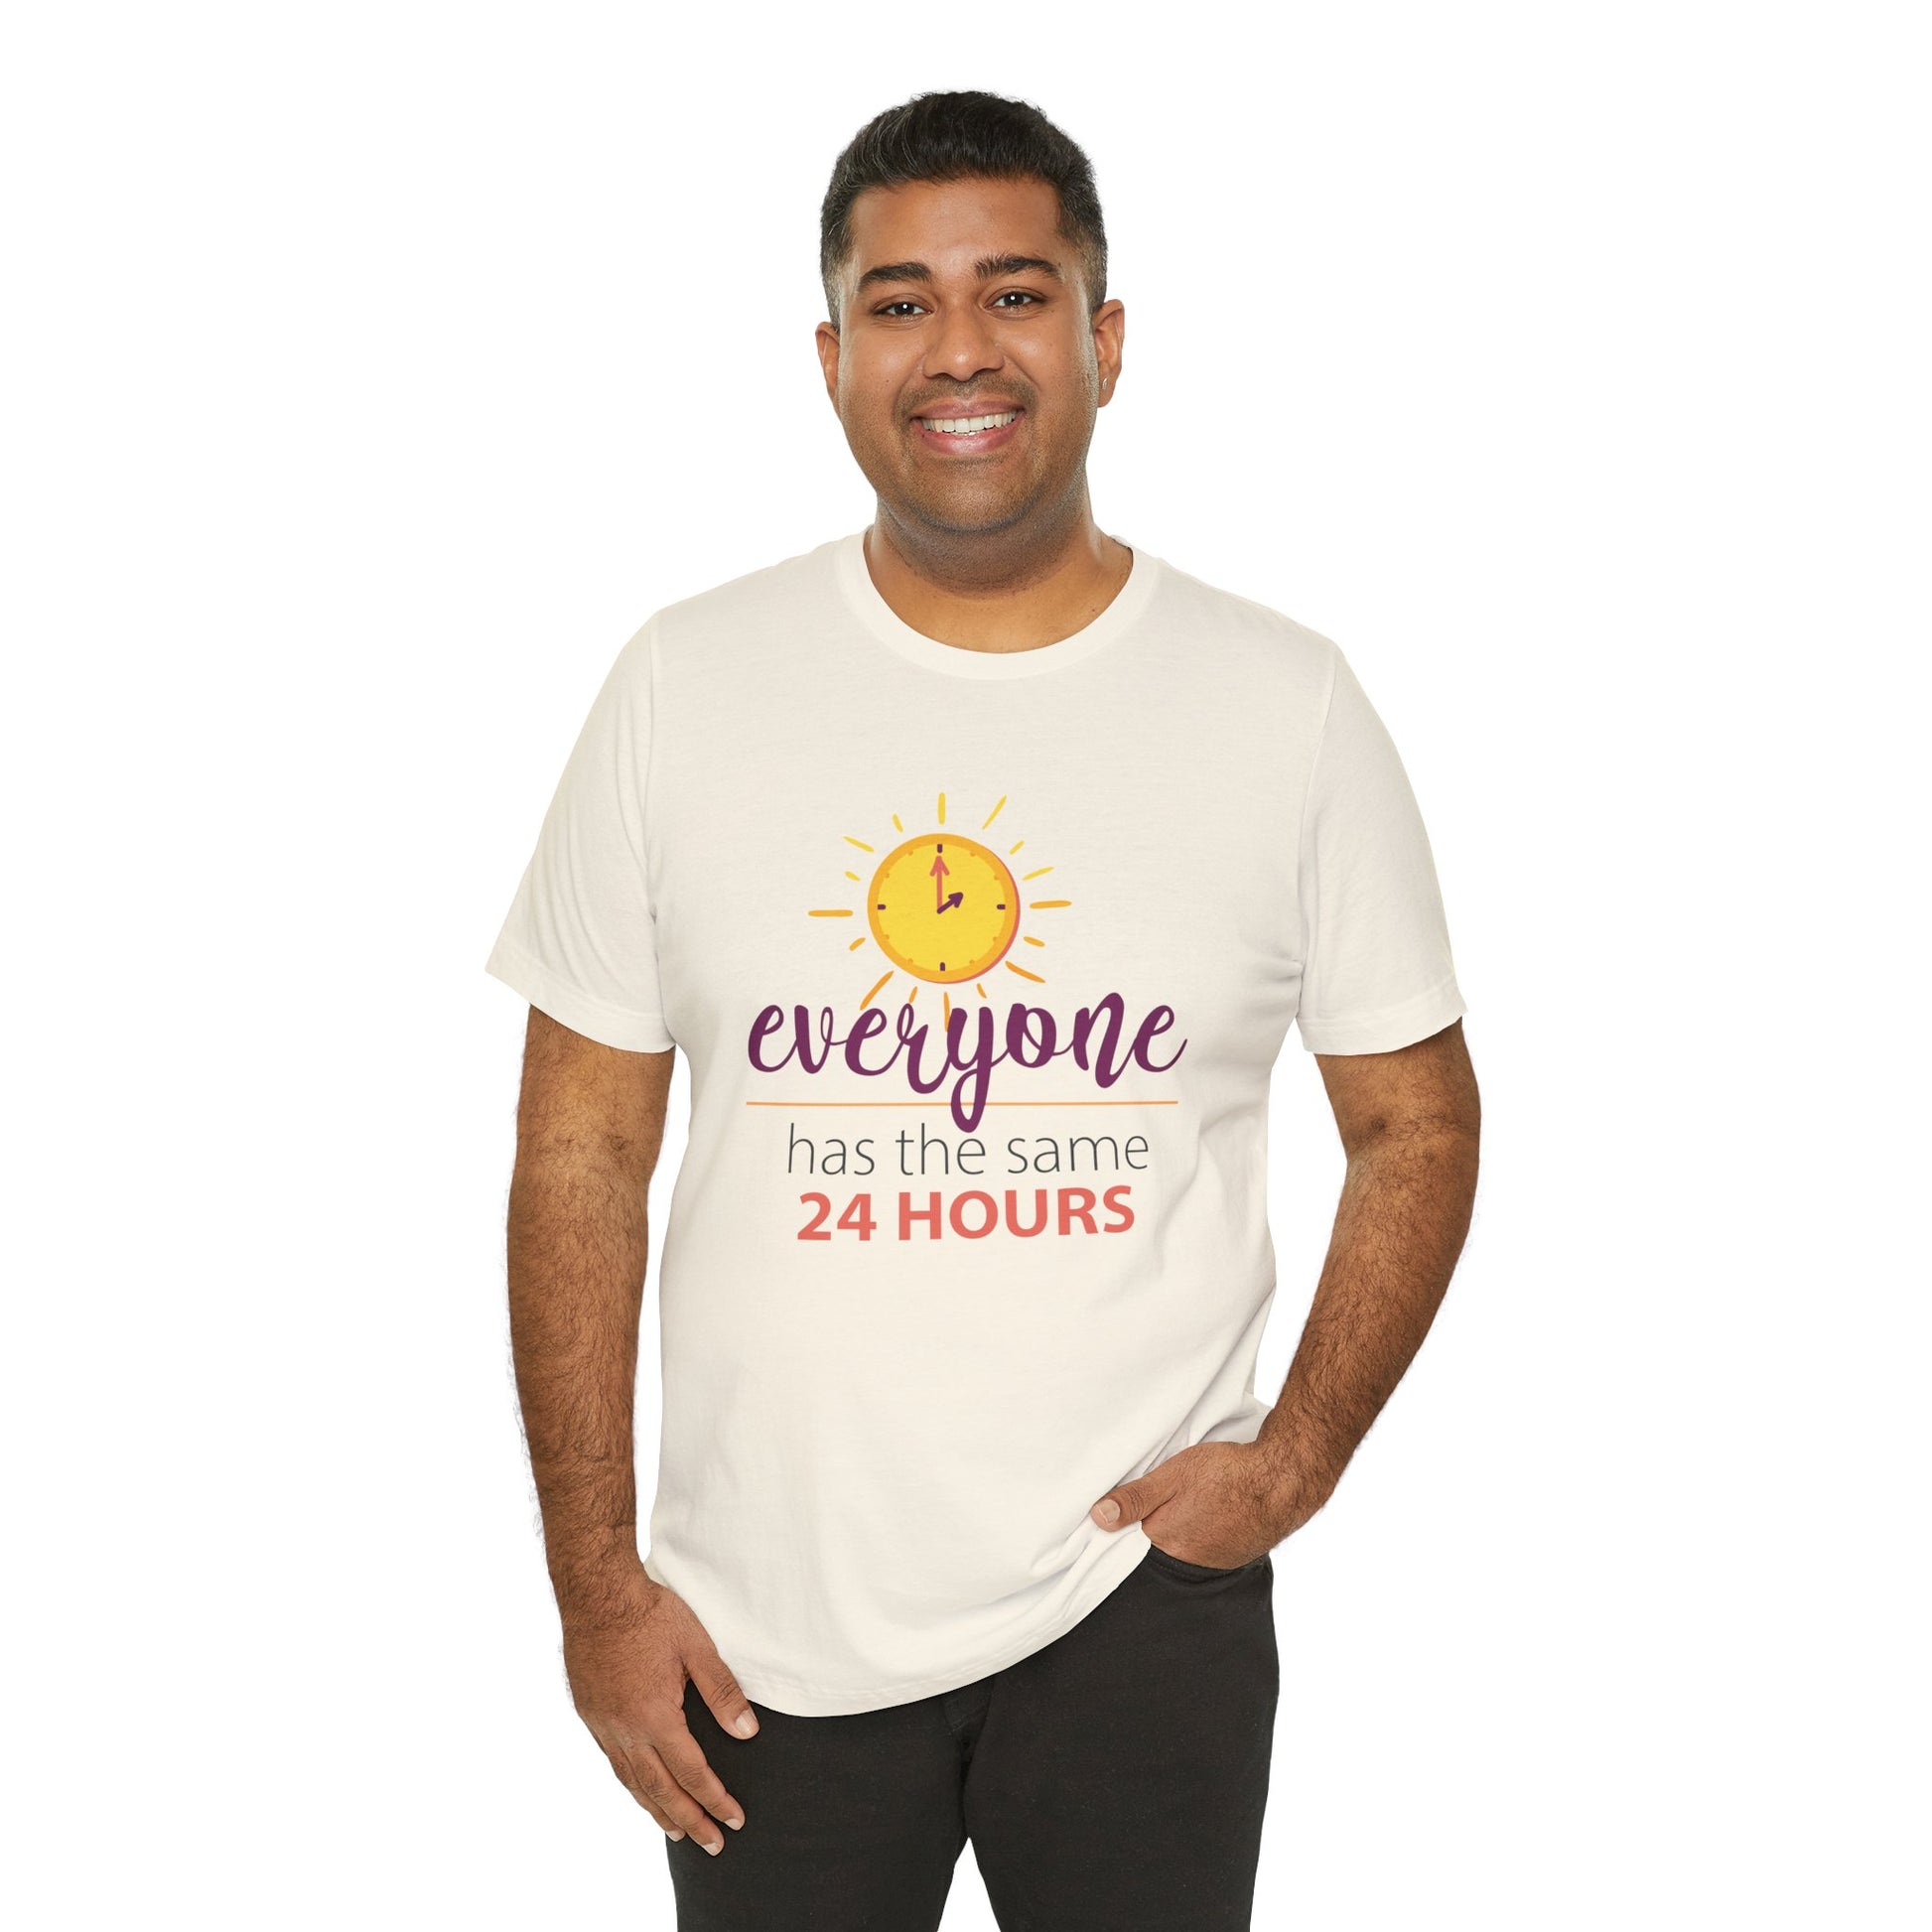 Everyone Has the Same 24 hours Inspirational Quote Short Sleeve T-Shirt - Unisex - Motivational Treats